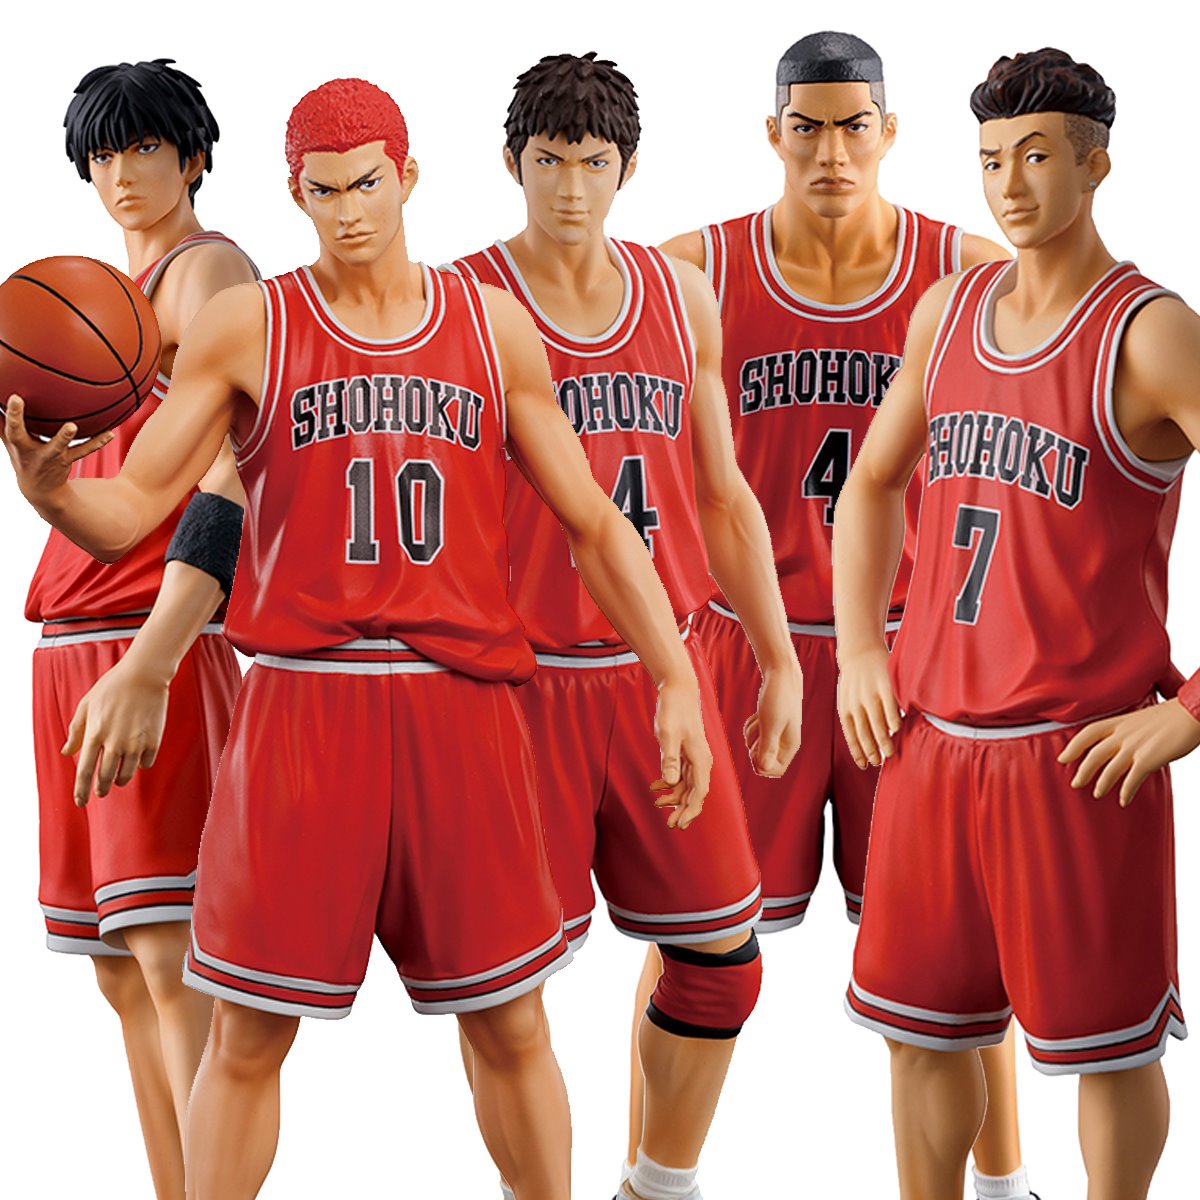 Slam Dunk One and Only Shohoku Starting Member Statue 5-Pack